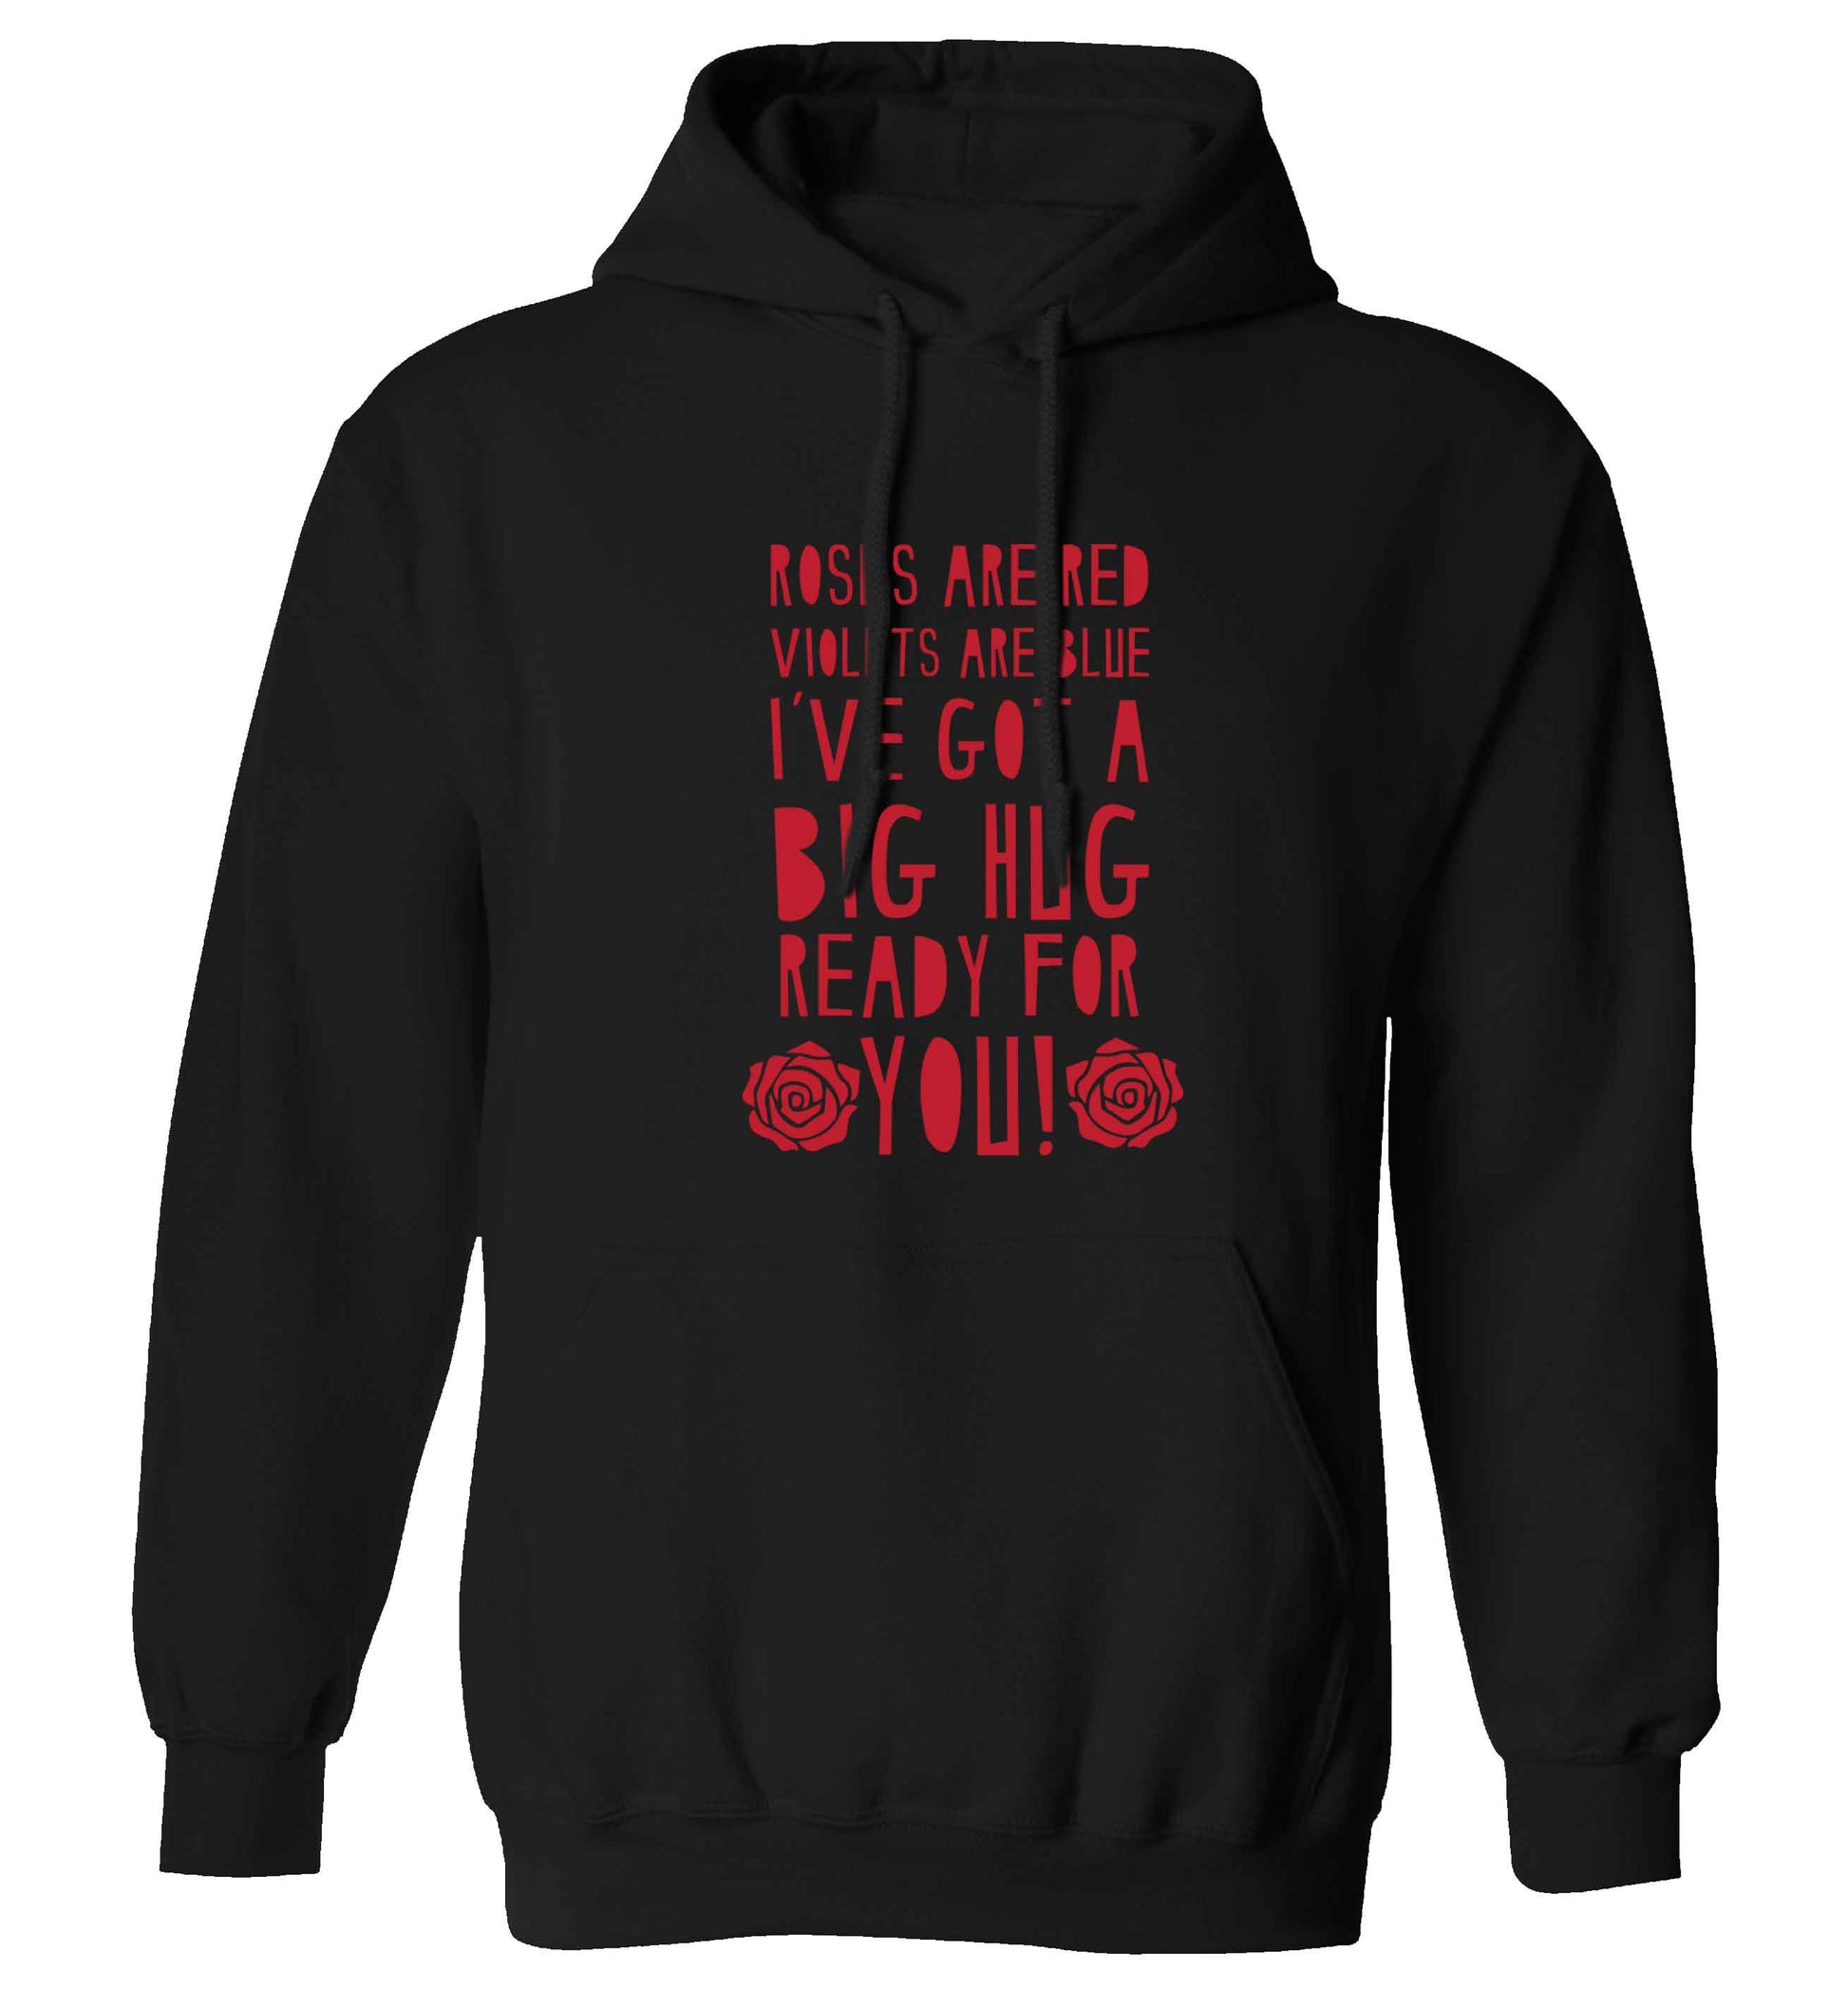 Roses are red violets are blue I've got a big hug coming for you adults unisex black hoodie 2XL